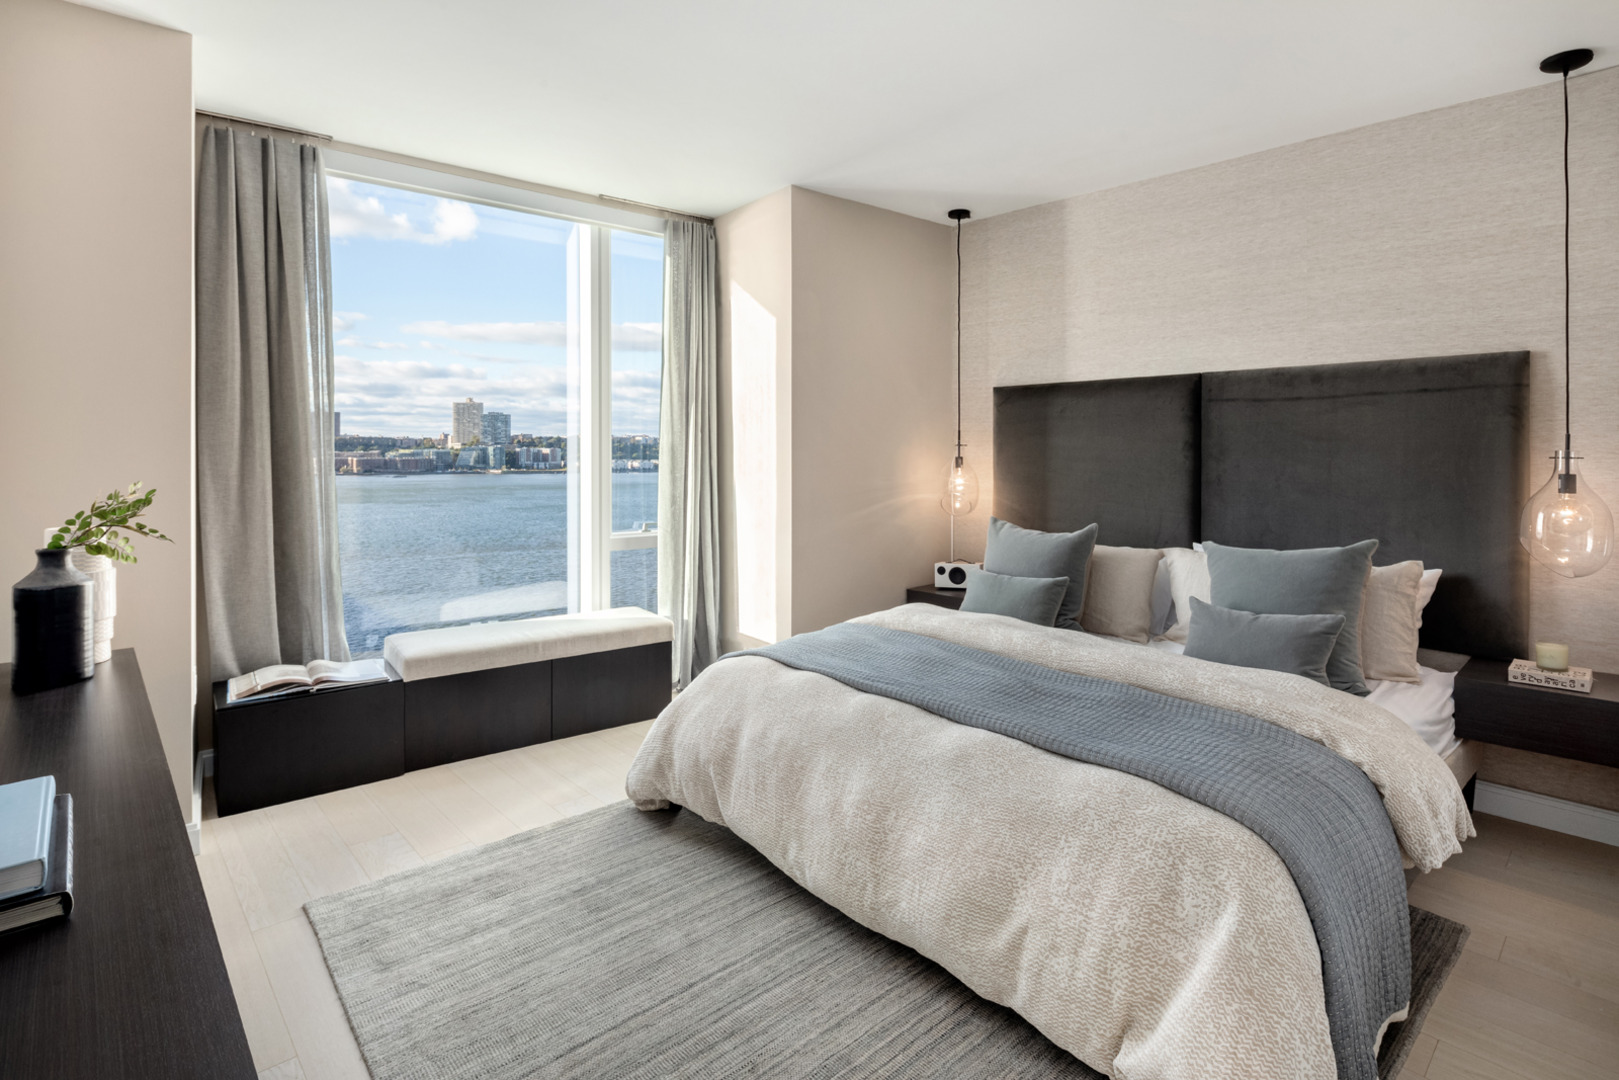 Modern and cozy bedroom with a luxurious bed and a stunning view of the river through large windows, bathed in natural light.